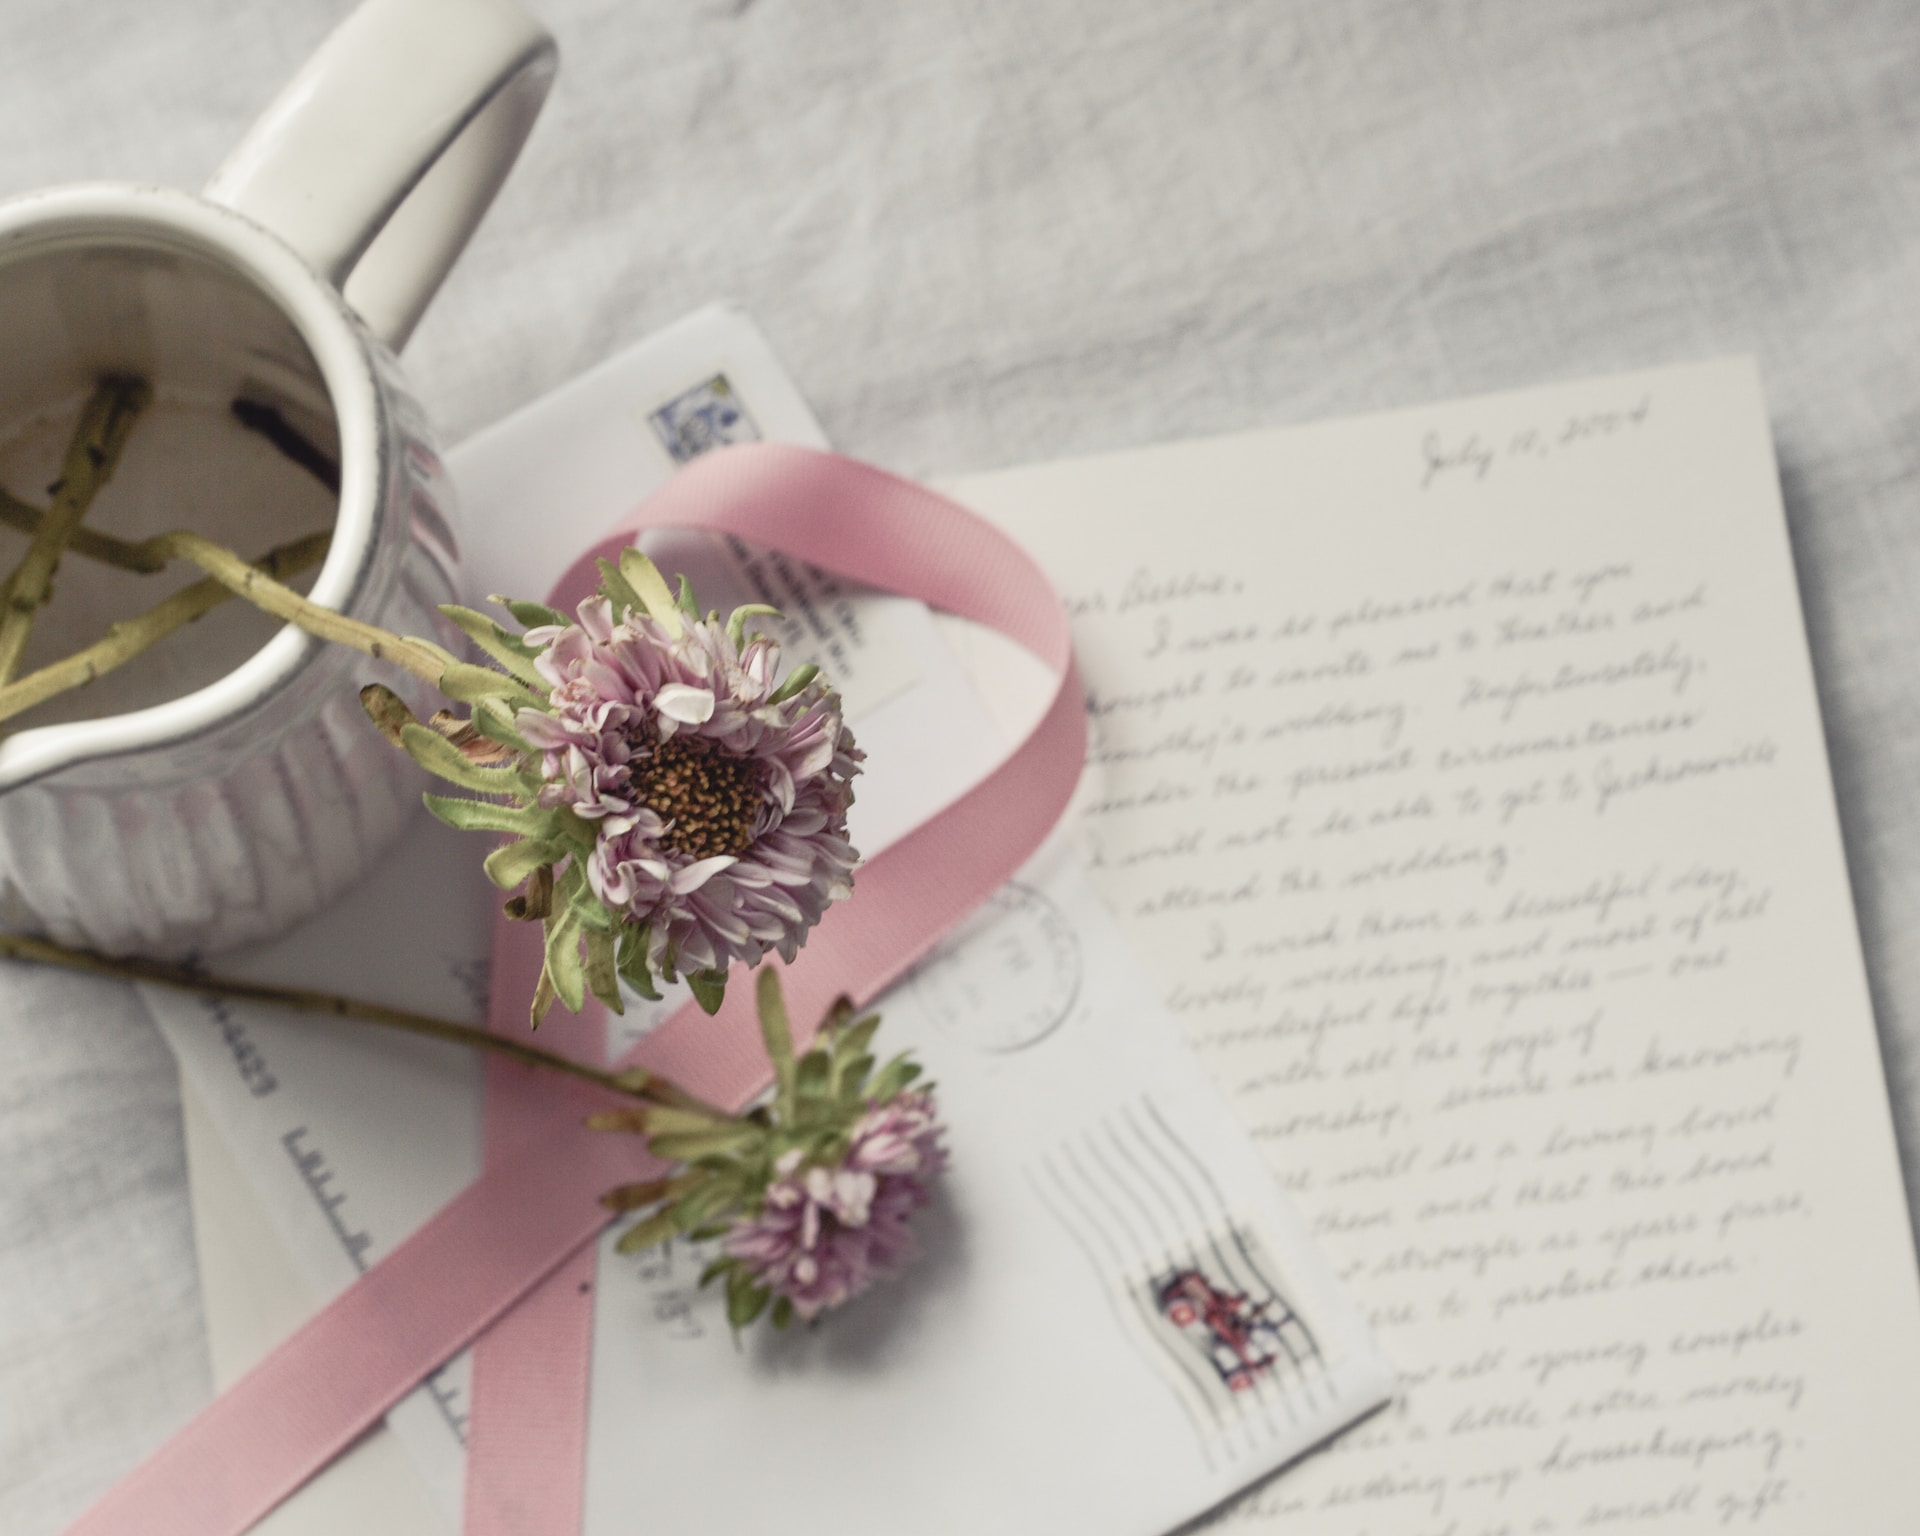 Two flowers, a pink ribbon, a stamped envelope and a handwritten letter on a white paper and in cursive